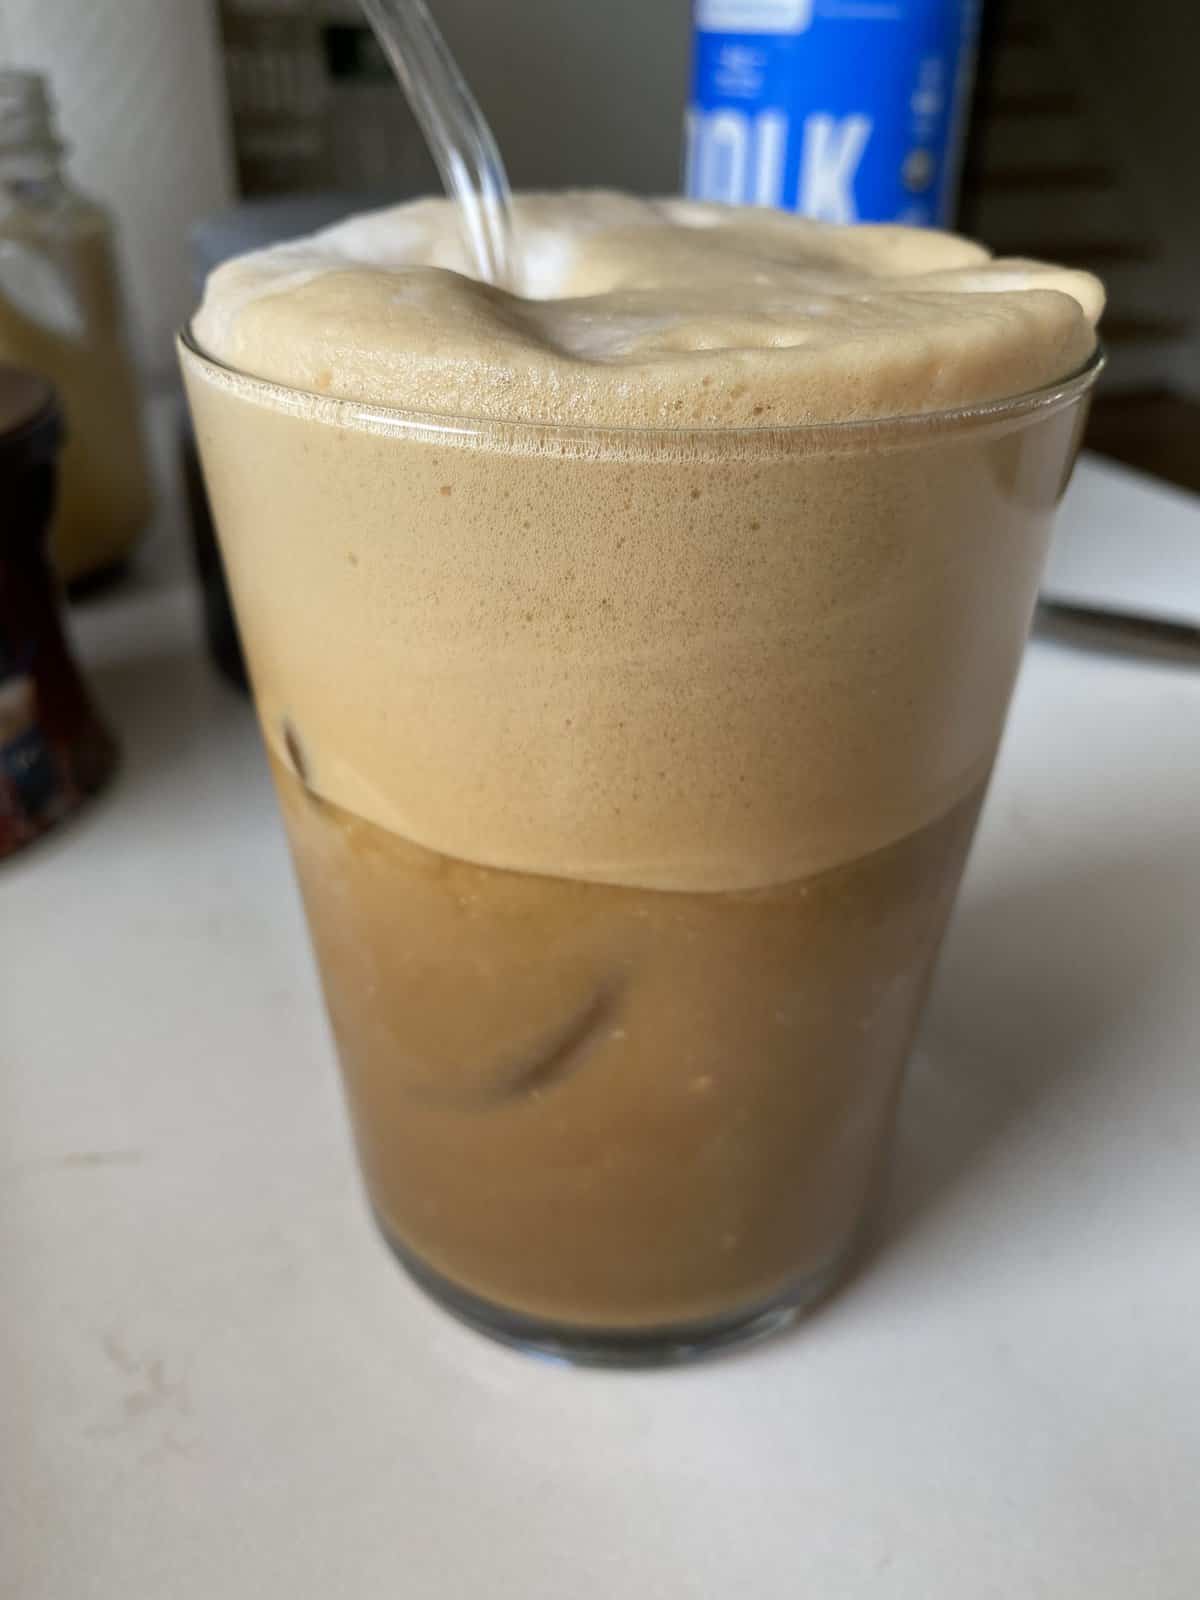 How to Make Cold Coffee, Iced Nescafe Frappe